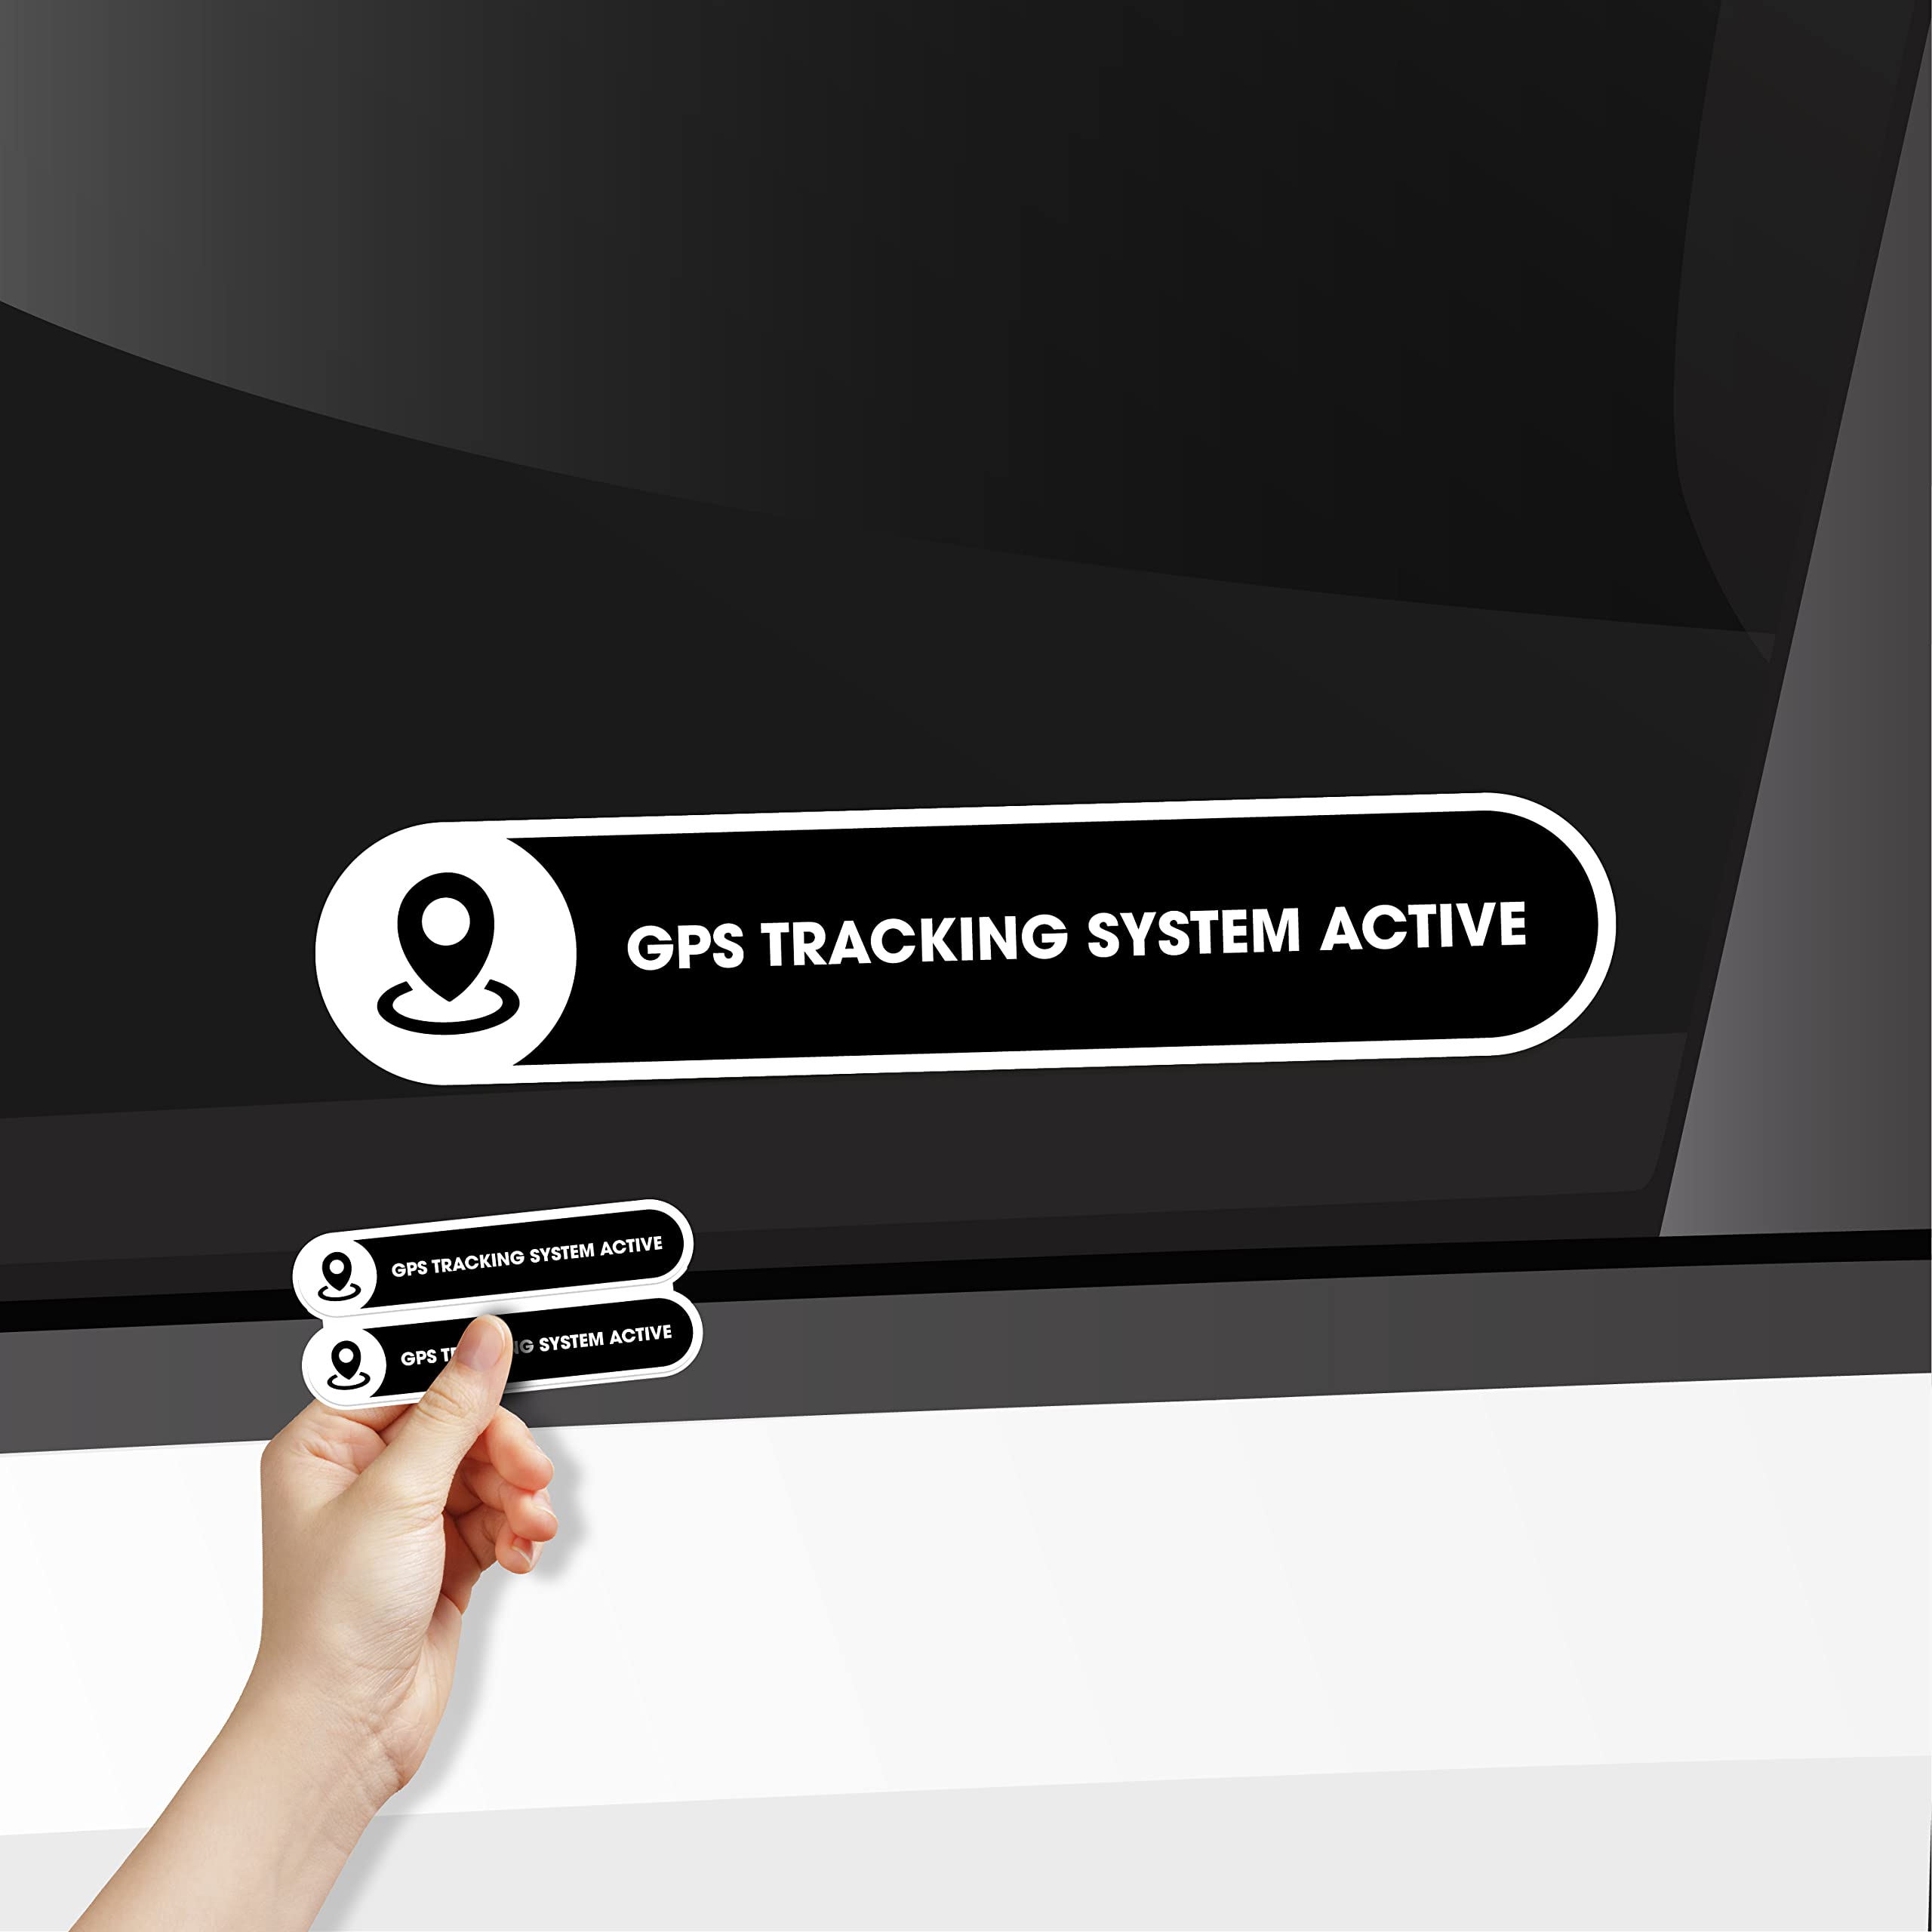 Small 2 Pack GPS Tracking System Sticker | GPS Active Sign for Cars | Car Window Sticker Sign | Black Glossy 5x1 Inches Waterproof Vinyl Sticker | Tracking System in Use | Anti Theft Security Sticker